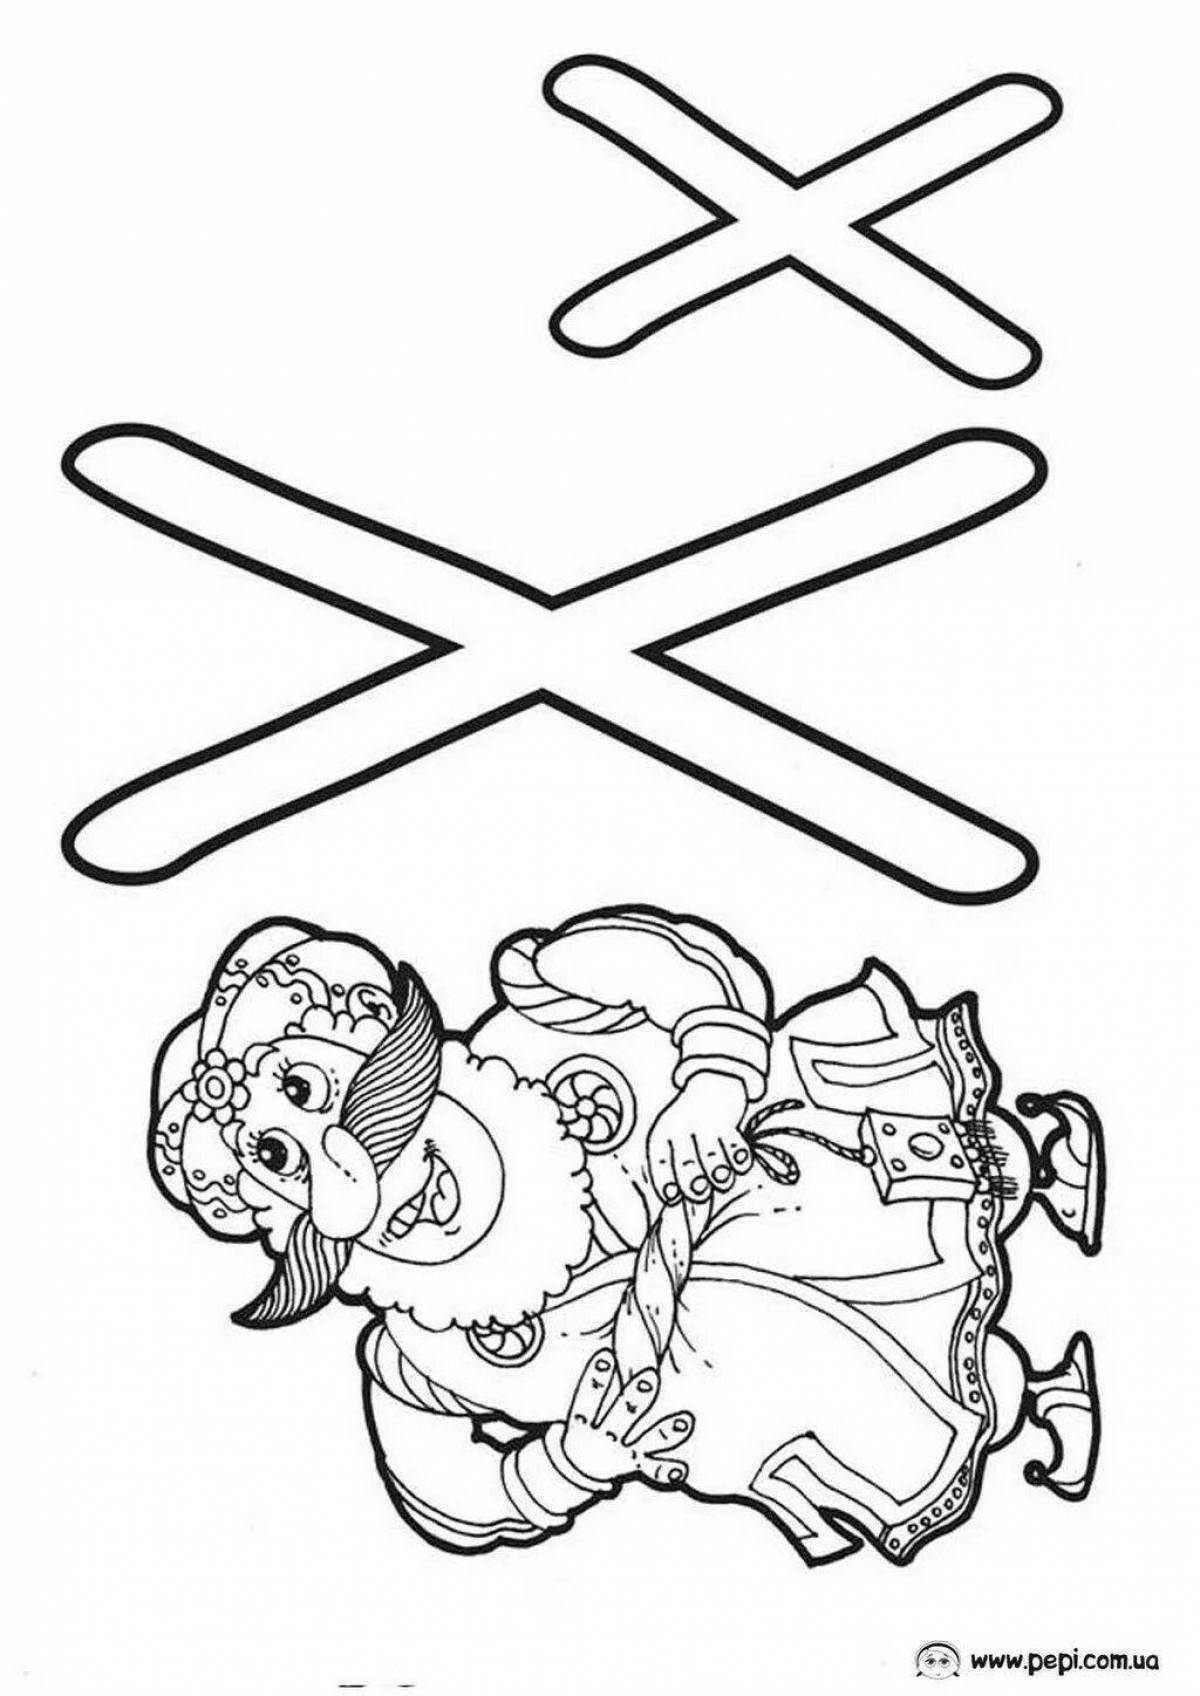 Fun coloring book with the letter x for preschoolers